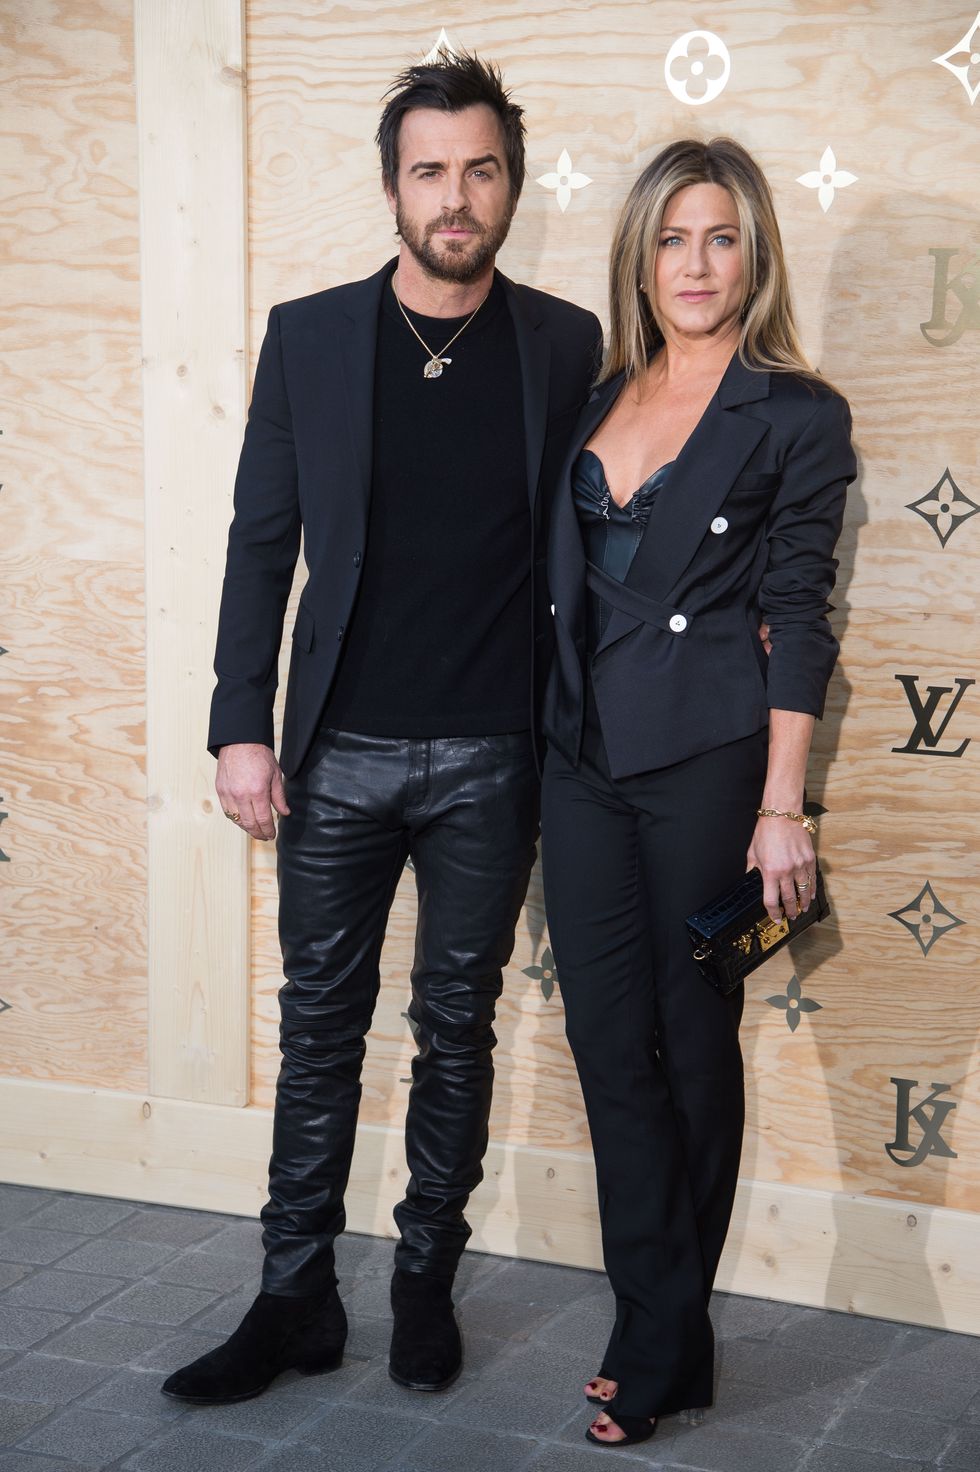 PARIS, FRANCE - APRIL 11:  (L-R)  Justin Theroux and Jennifer Aniston attend the Louis Vuitton's Dinner for the Launch of Bags by Artist Jeff Koons at Musee du Louvre on April 11, 2017 in Paris, France.  (Photo by Stephane Cardinale - Corbis/Corbis via Getty Images)